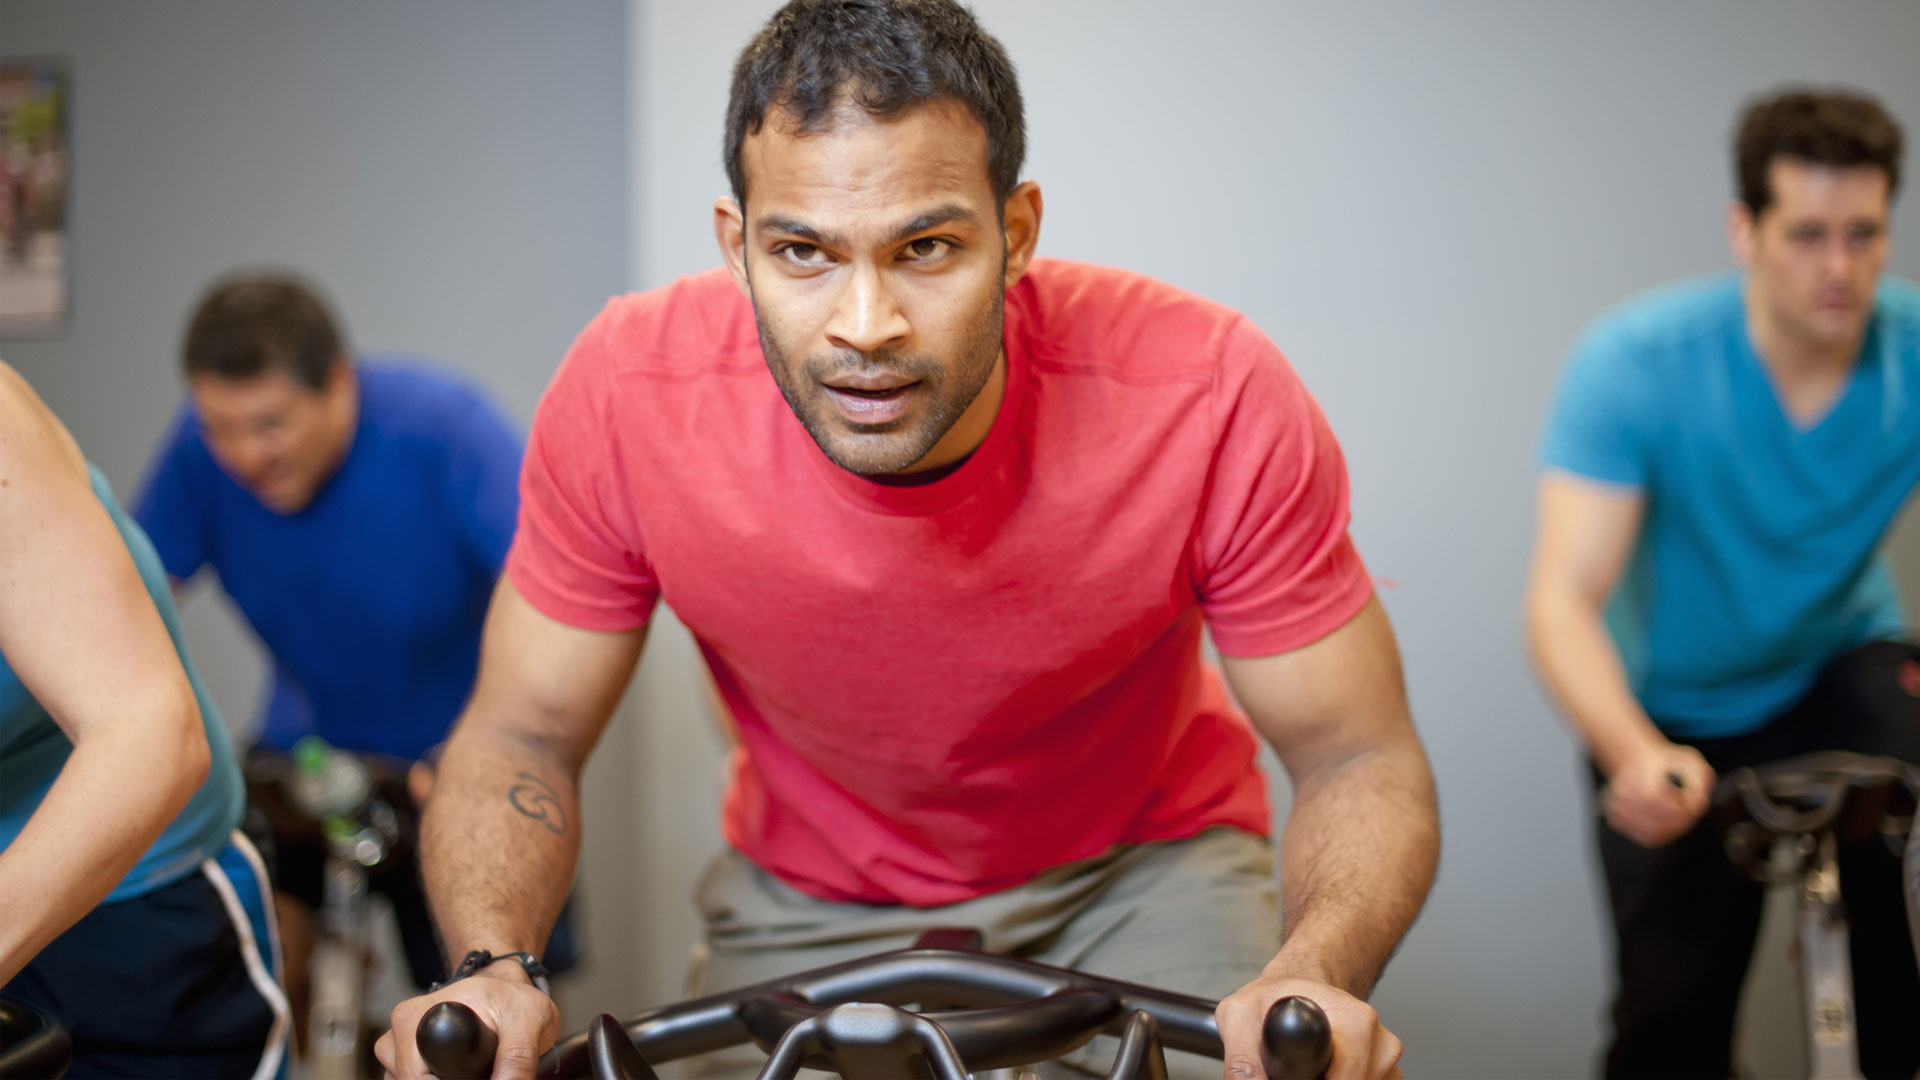 How to lose weight with an exercise bike: The photo shows a man on an exercise bike.